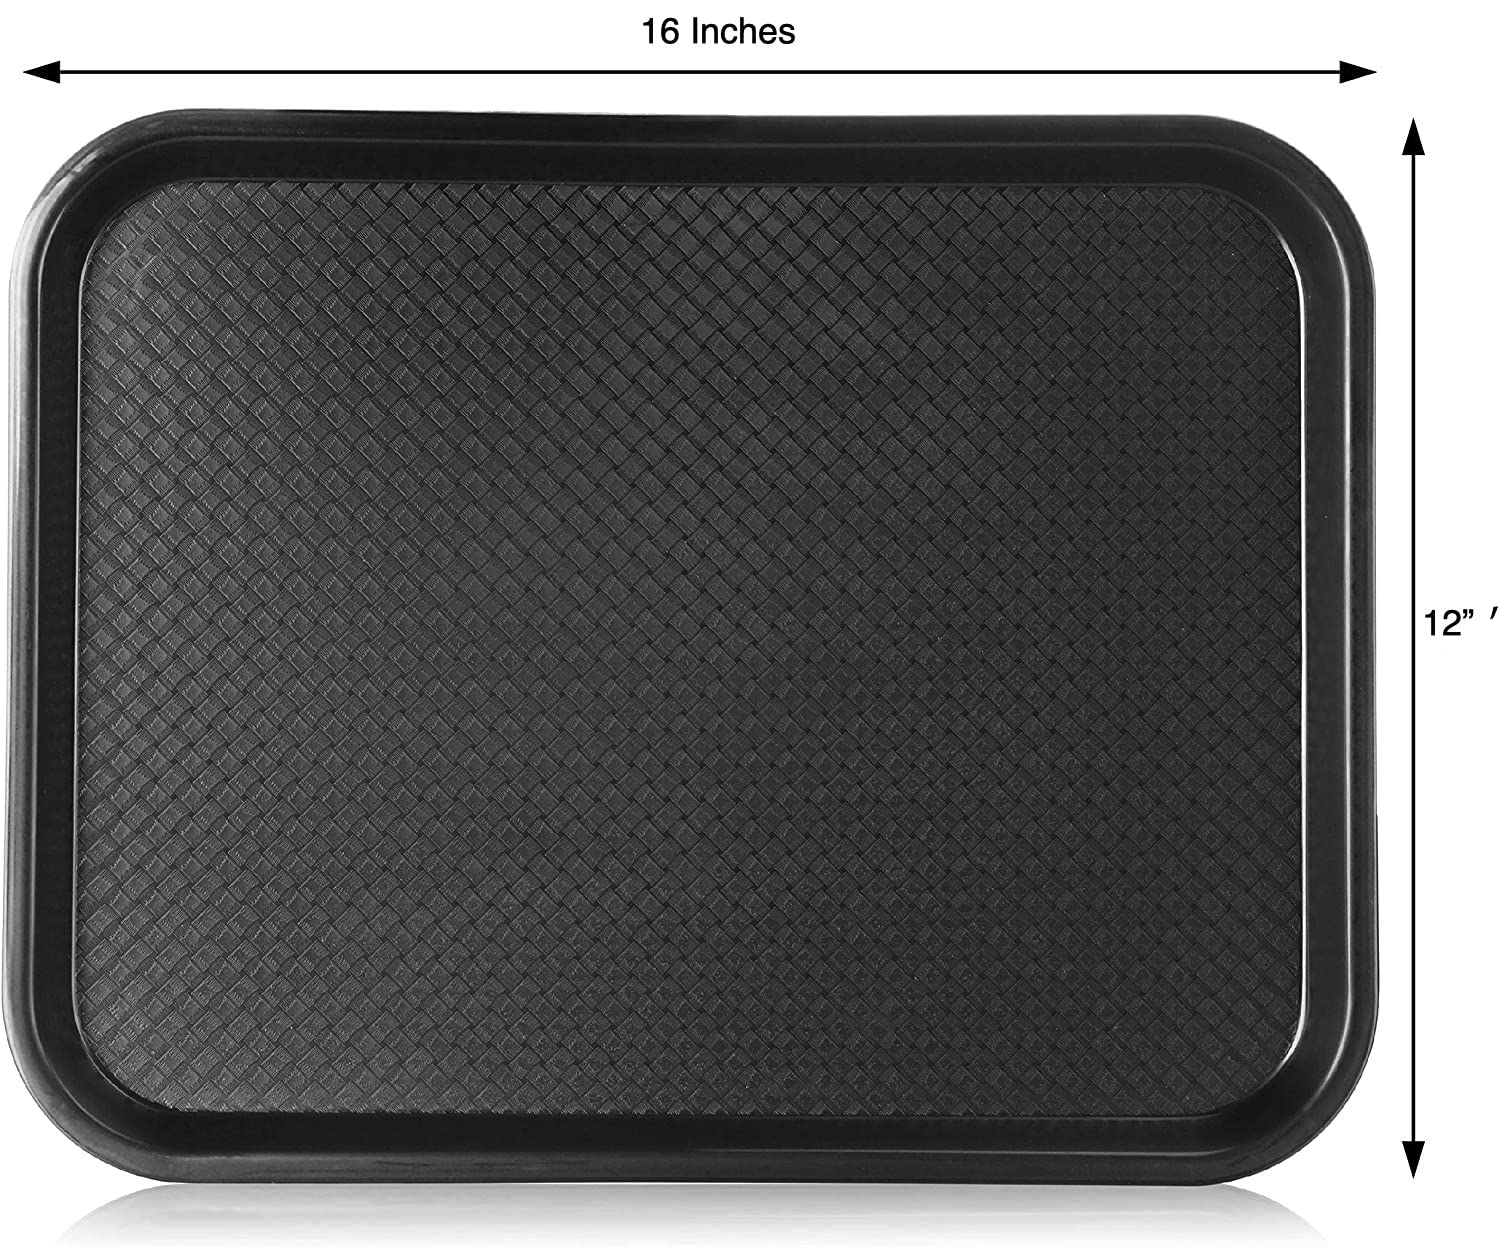 NJ Plastic Serving Platter Large Tray Unbreakable Snacks Tea Serving Tray Black Drink Breakfast Tea Dinner Coffee Salad Food for Dinning Table Home Kitchen (16 X 12 Inches) : 8 Pcs.